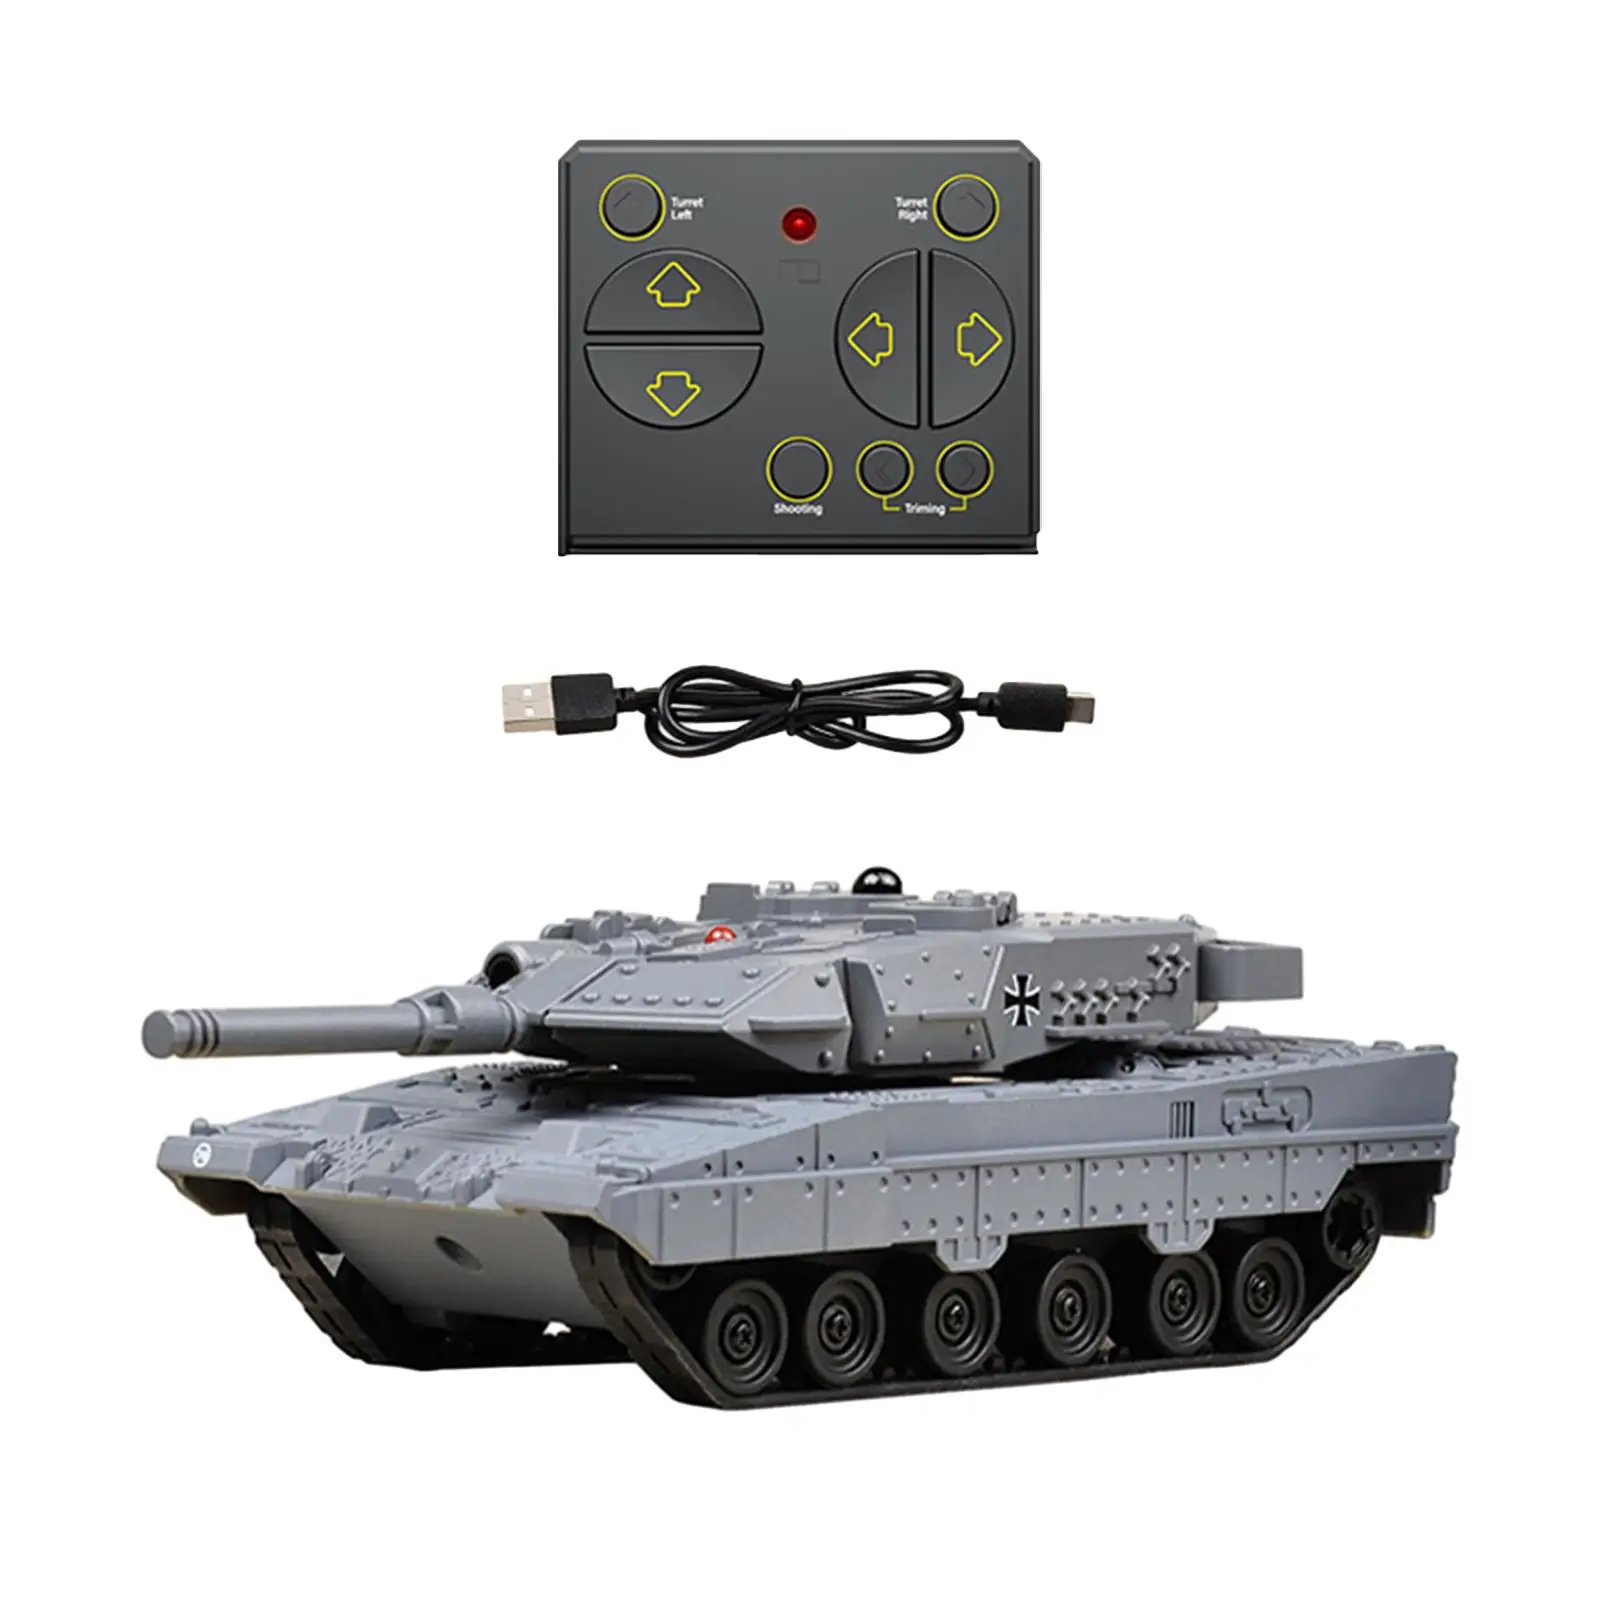 RC Tank 2.4GHz Realistic Sound Simulation Durable Remote Control Tank for 3 4 5 6 7 8 Years Children Kids Boys Girls New Year